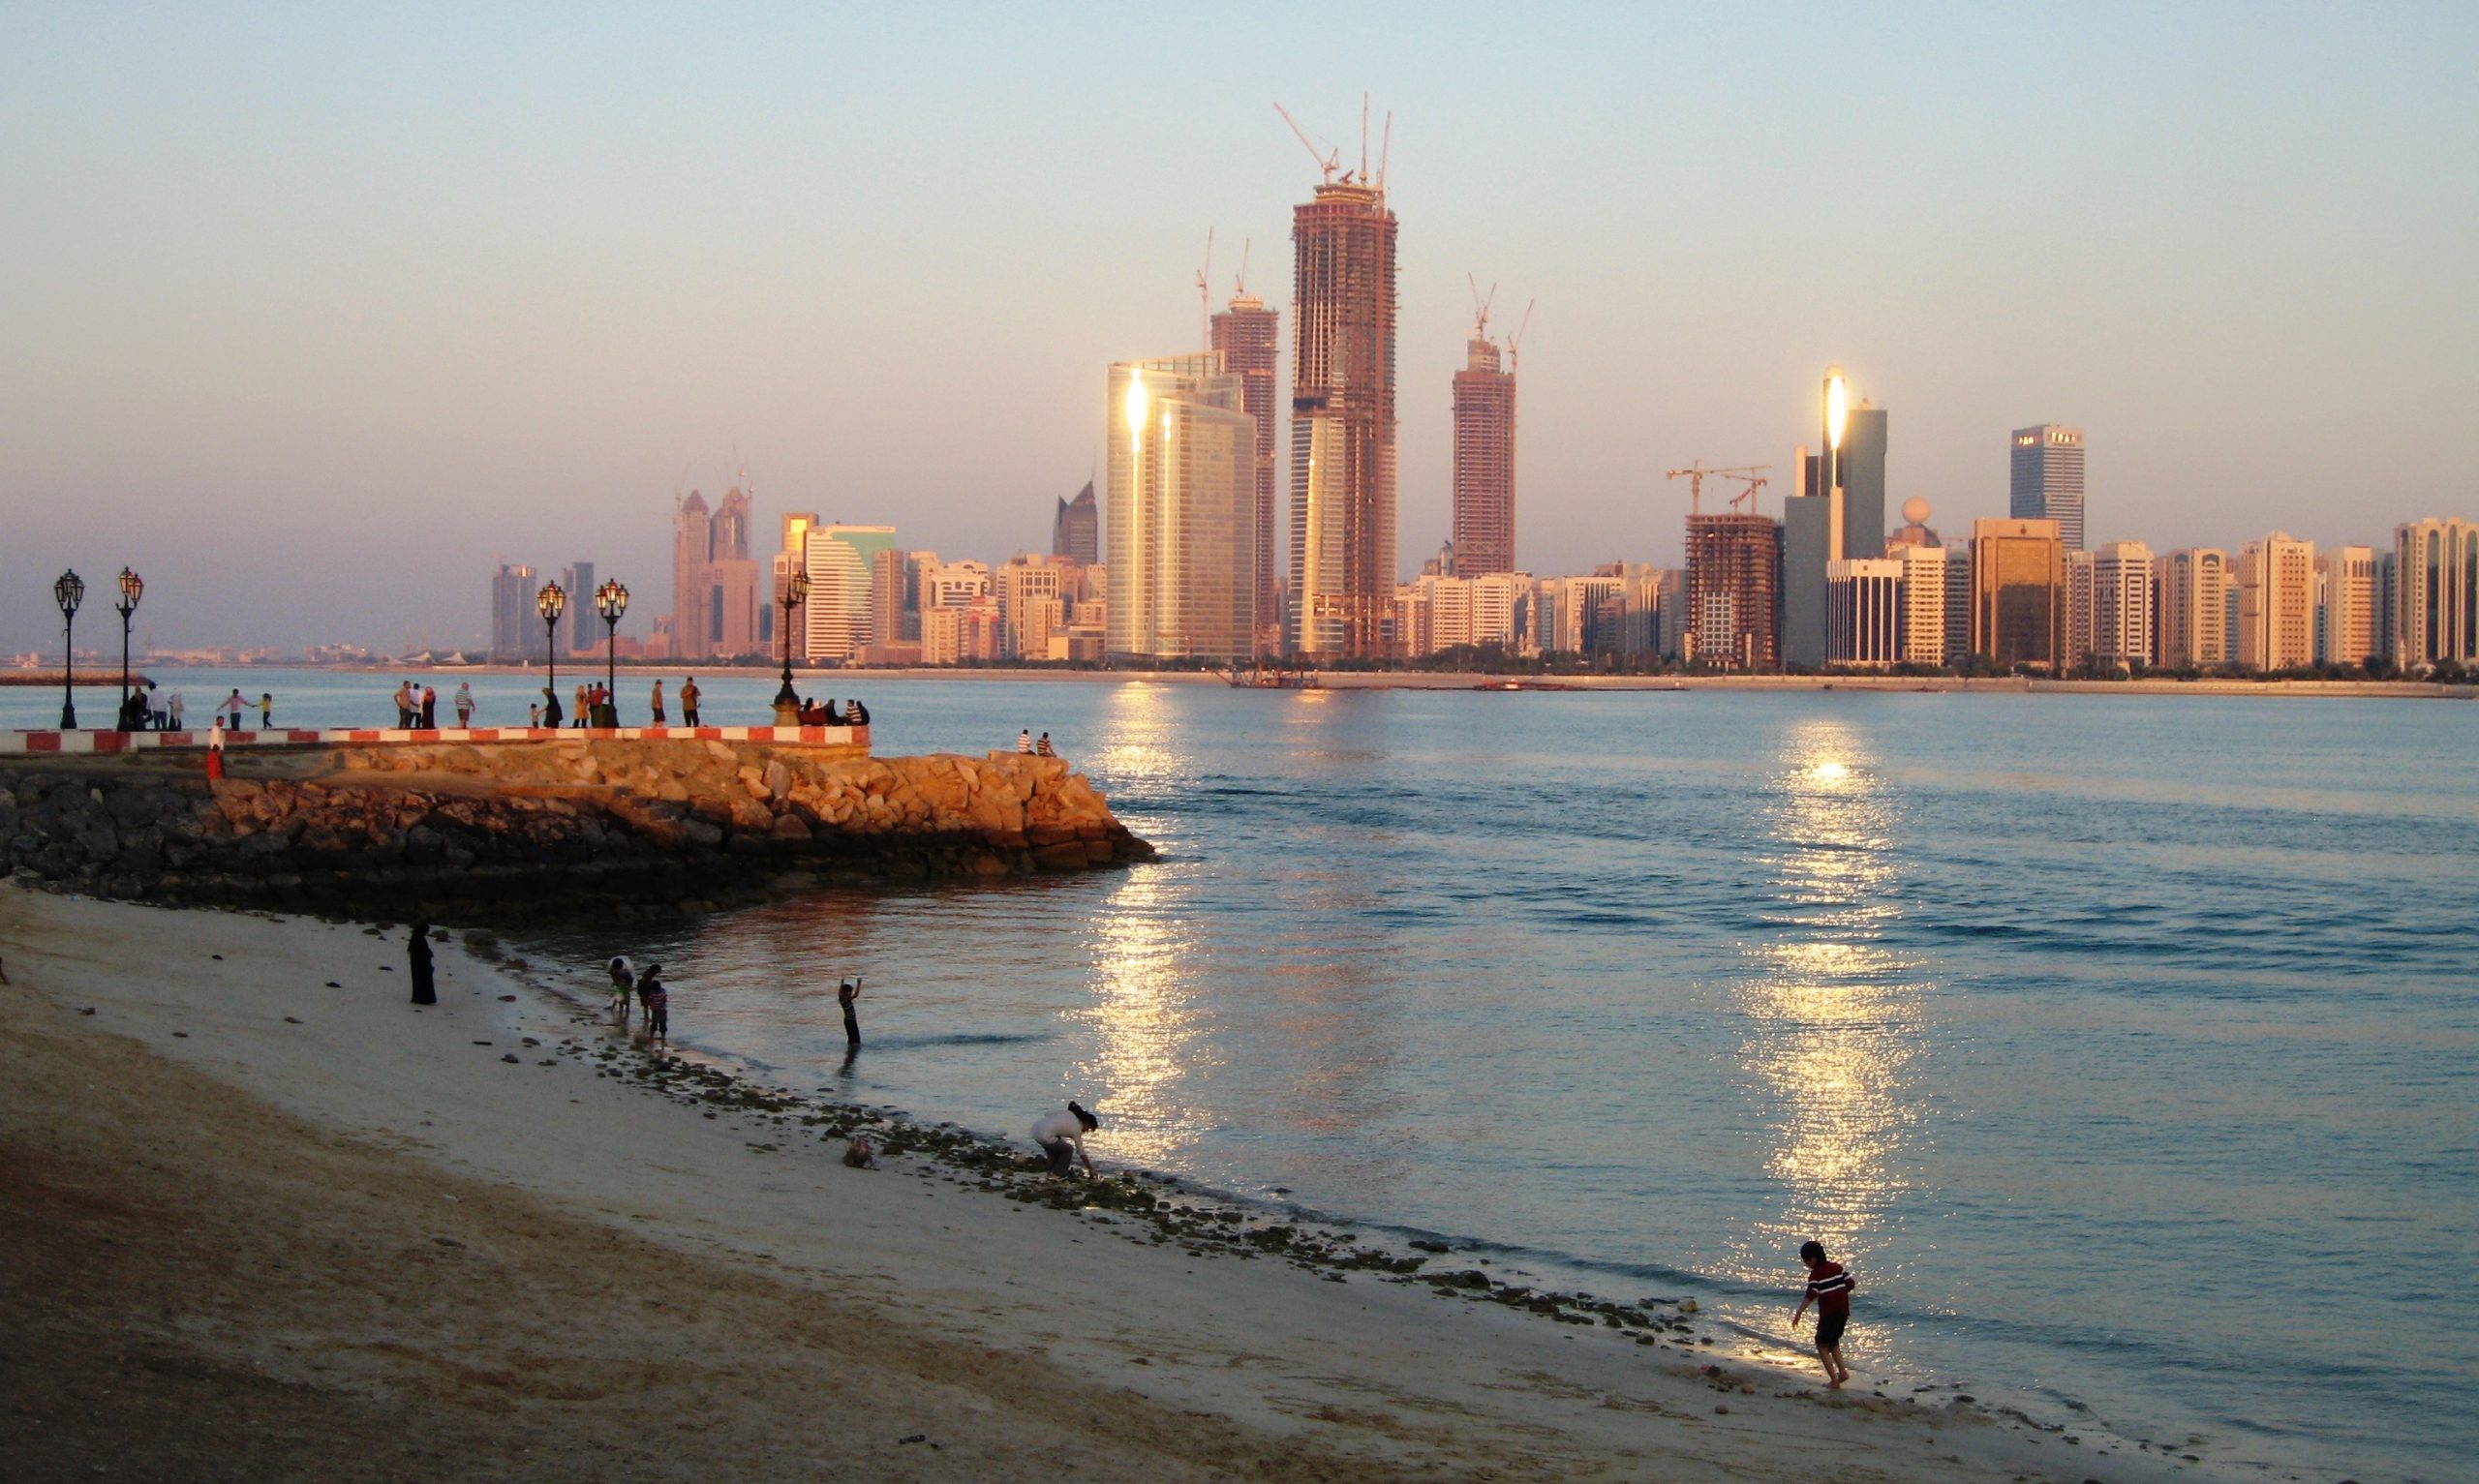 Abu Dhabi gleaming in evening light, taken from the Breakwater in the Marina area.